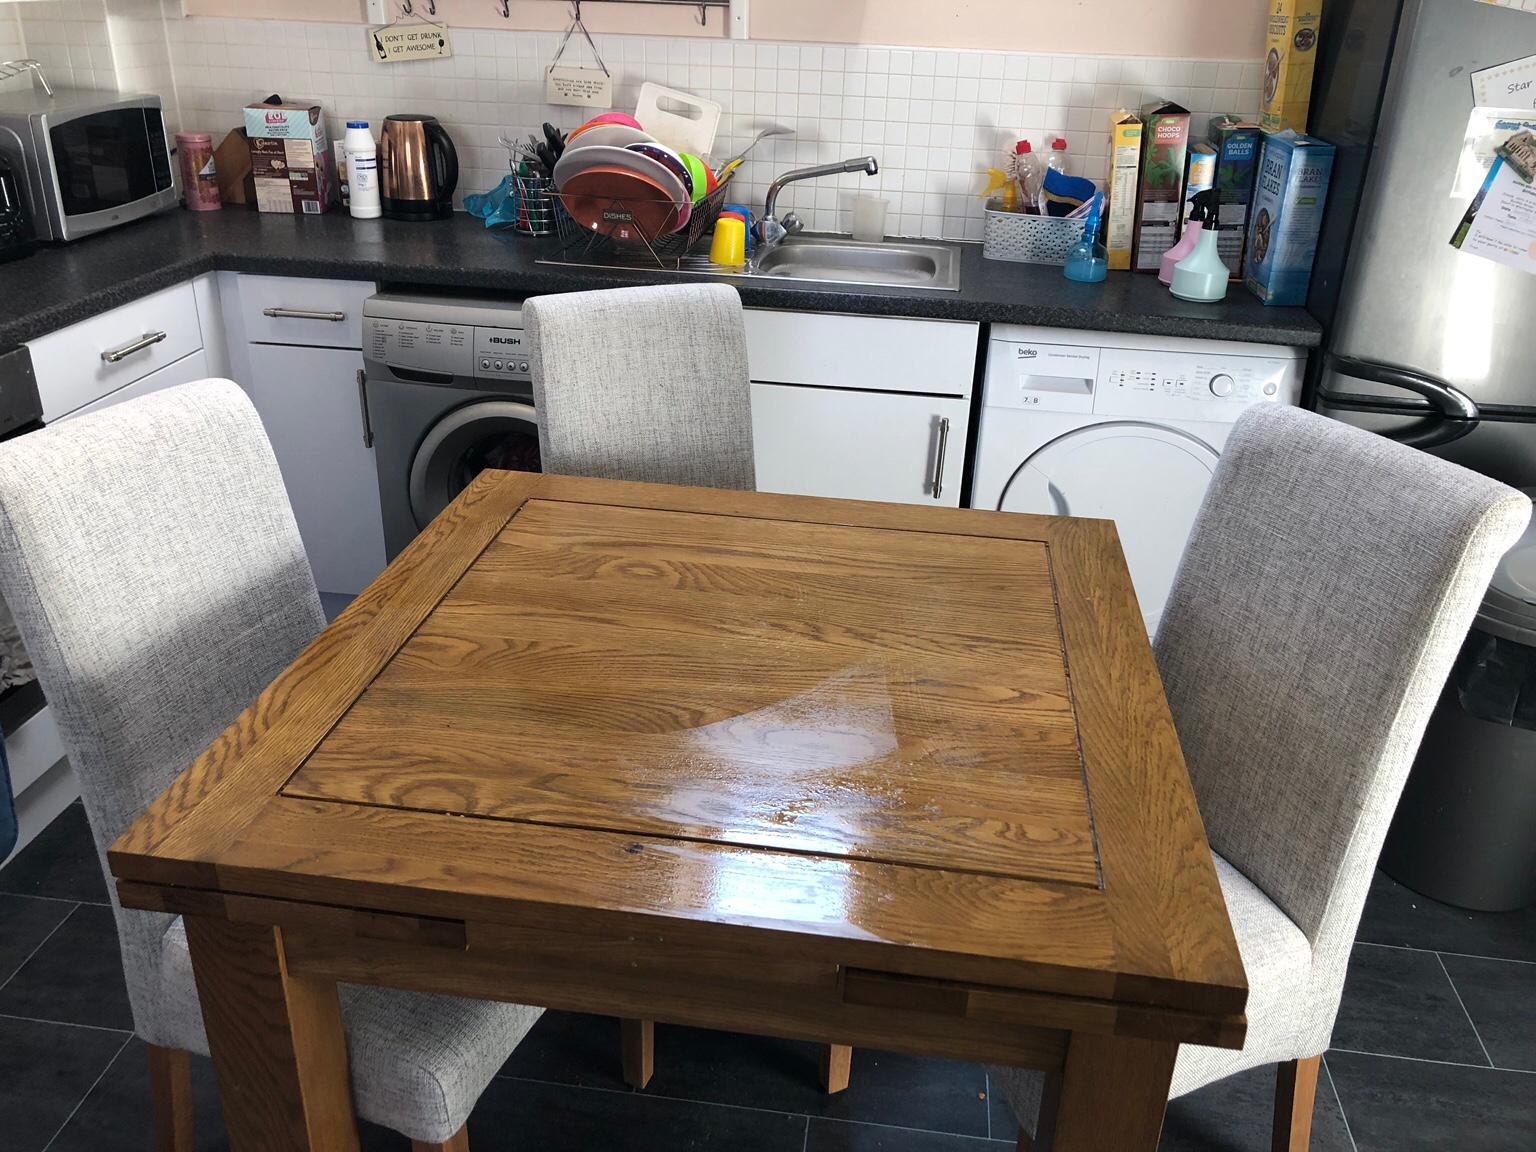 Oak Furniture Land Dining Table And Chairs In Burtonwood Fur 300